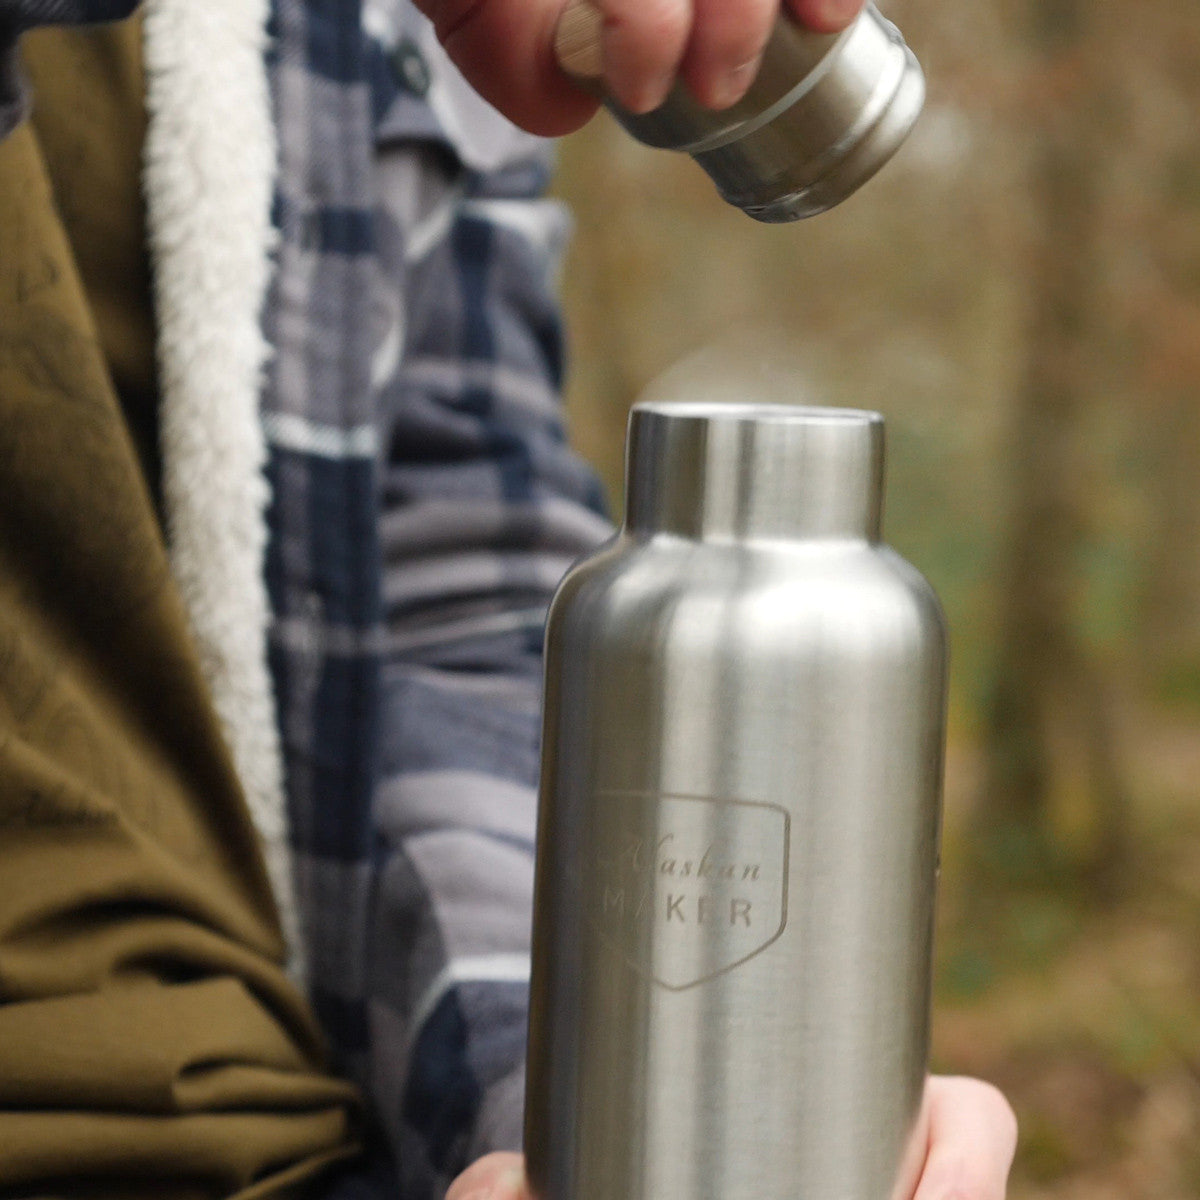 Stainless steel water bottle being used for steaming hot drinks